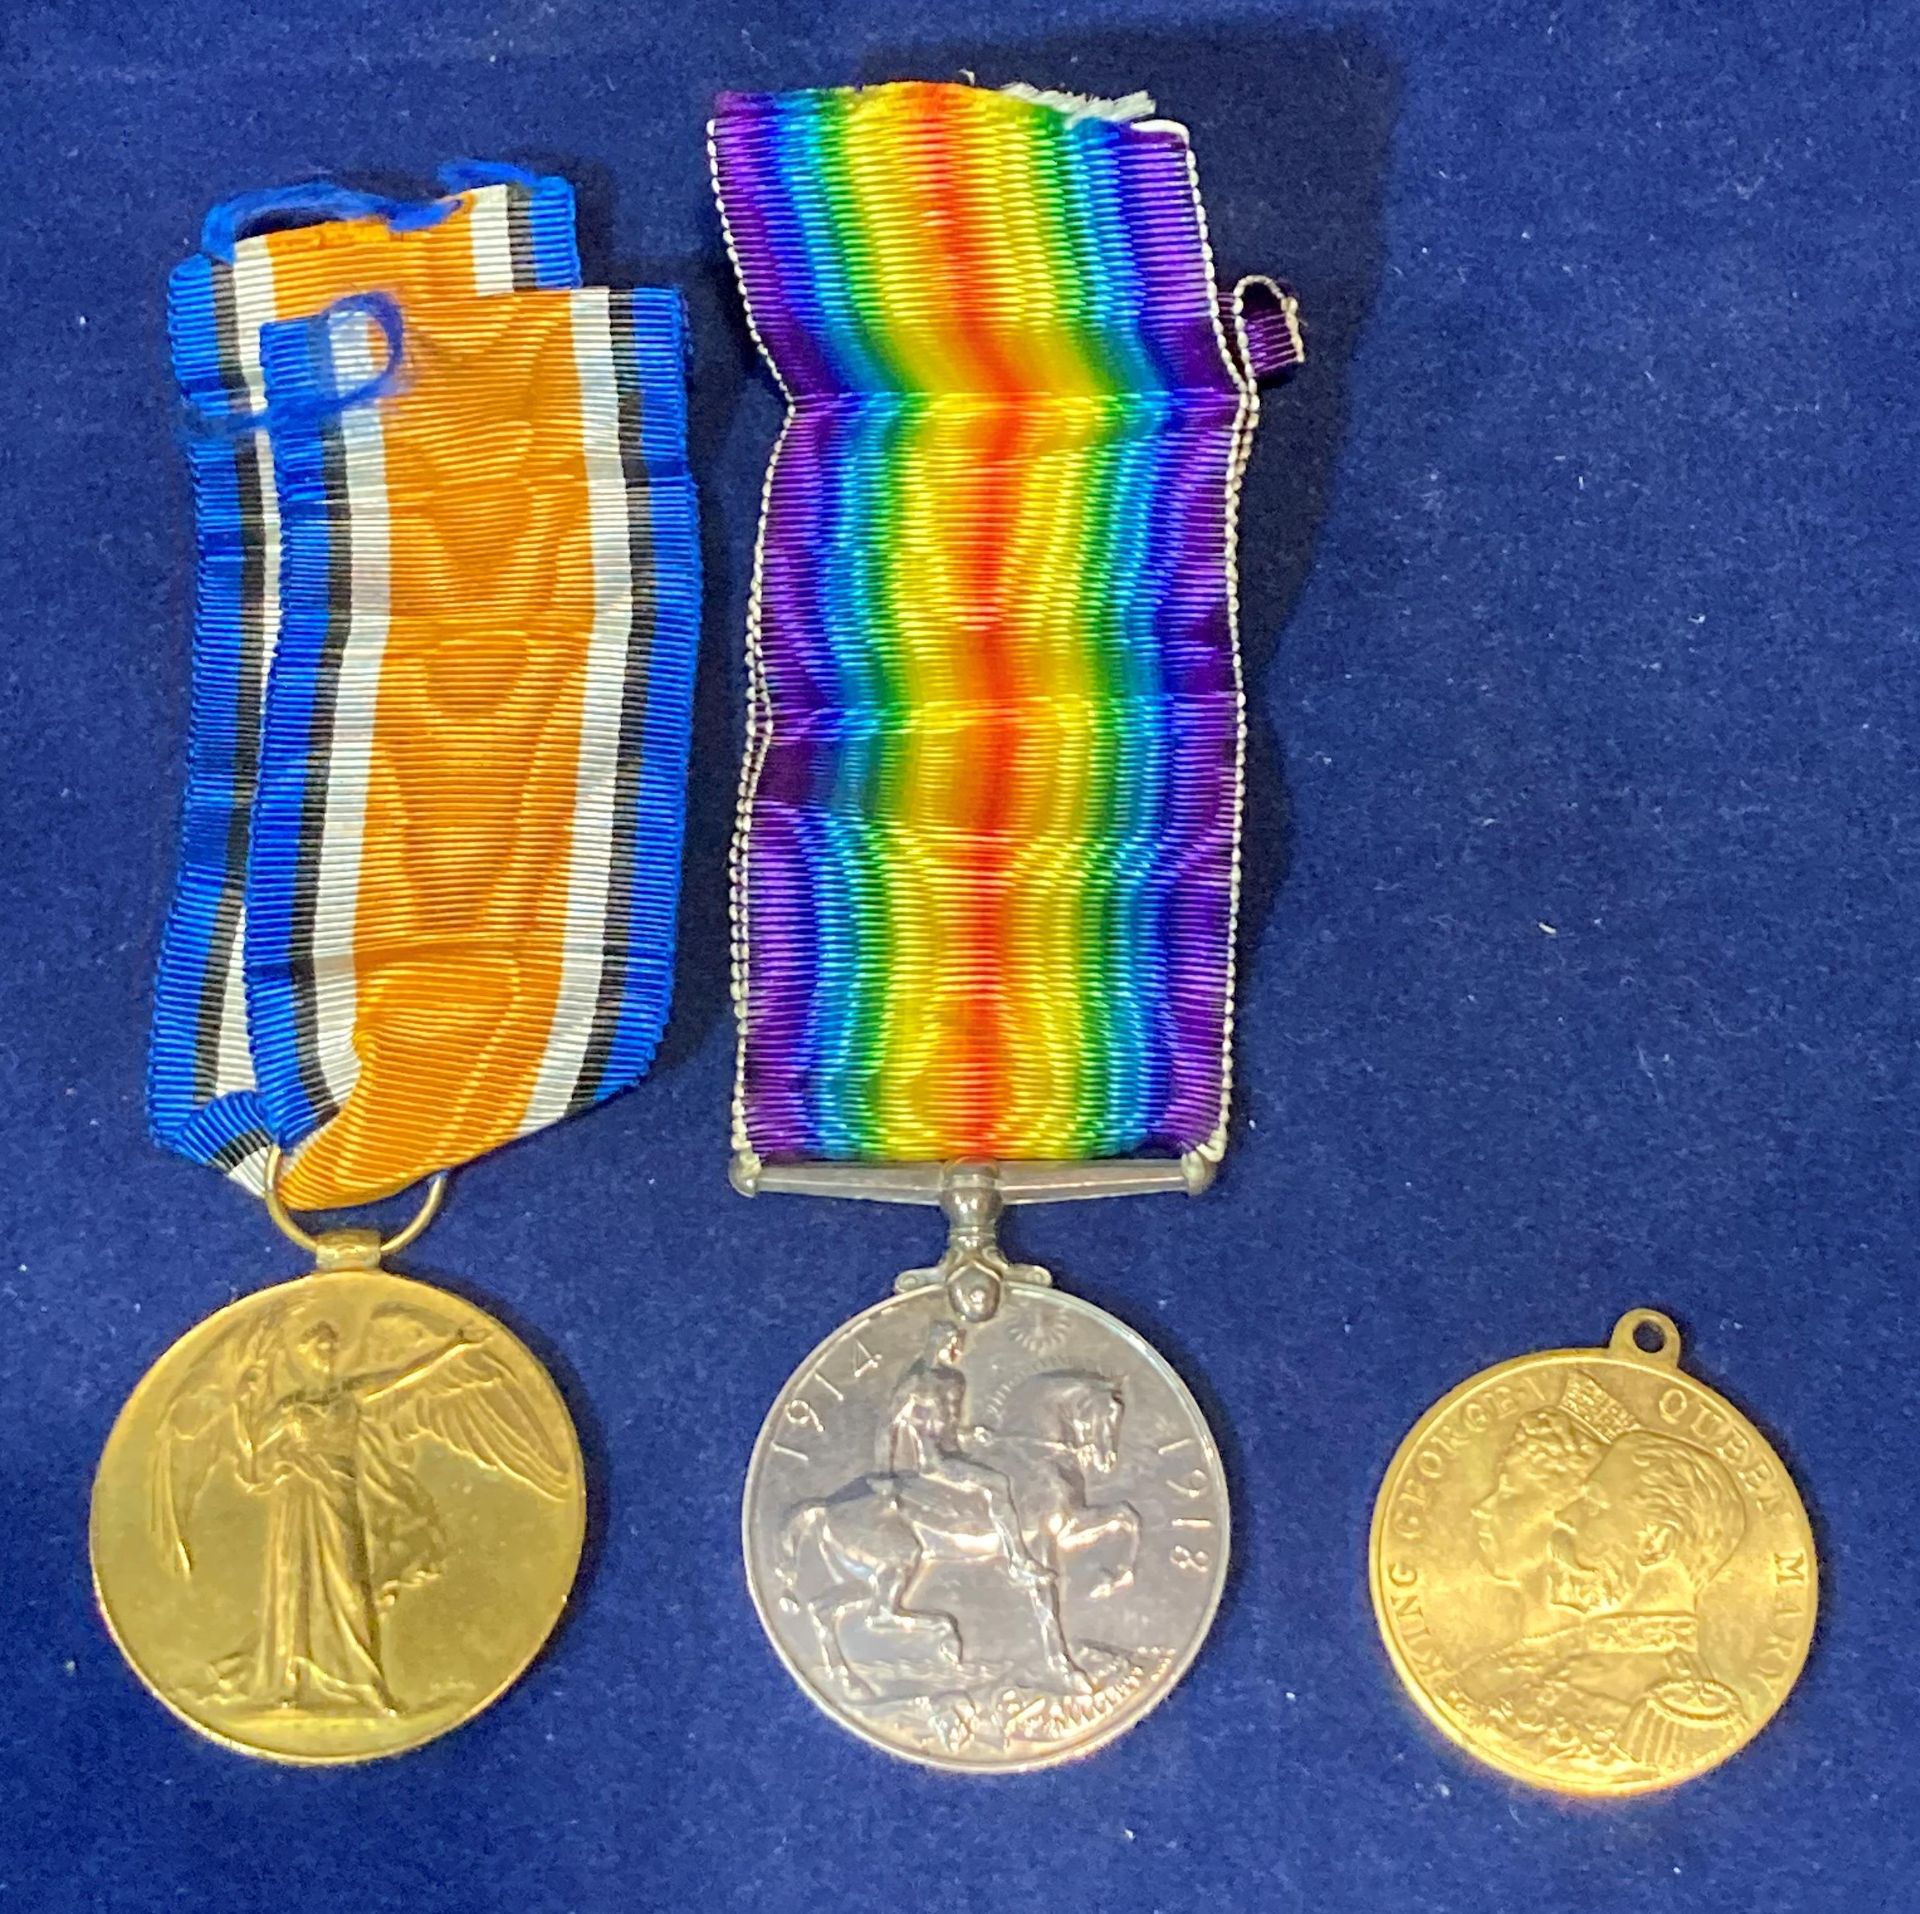 Two First World War medals - British War Medal 1914-1918 complete with ribbon to M-372366 Pte W